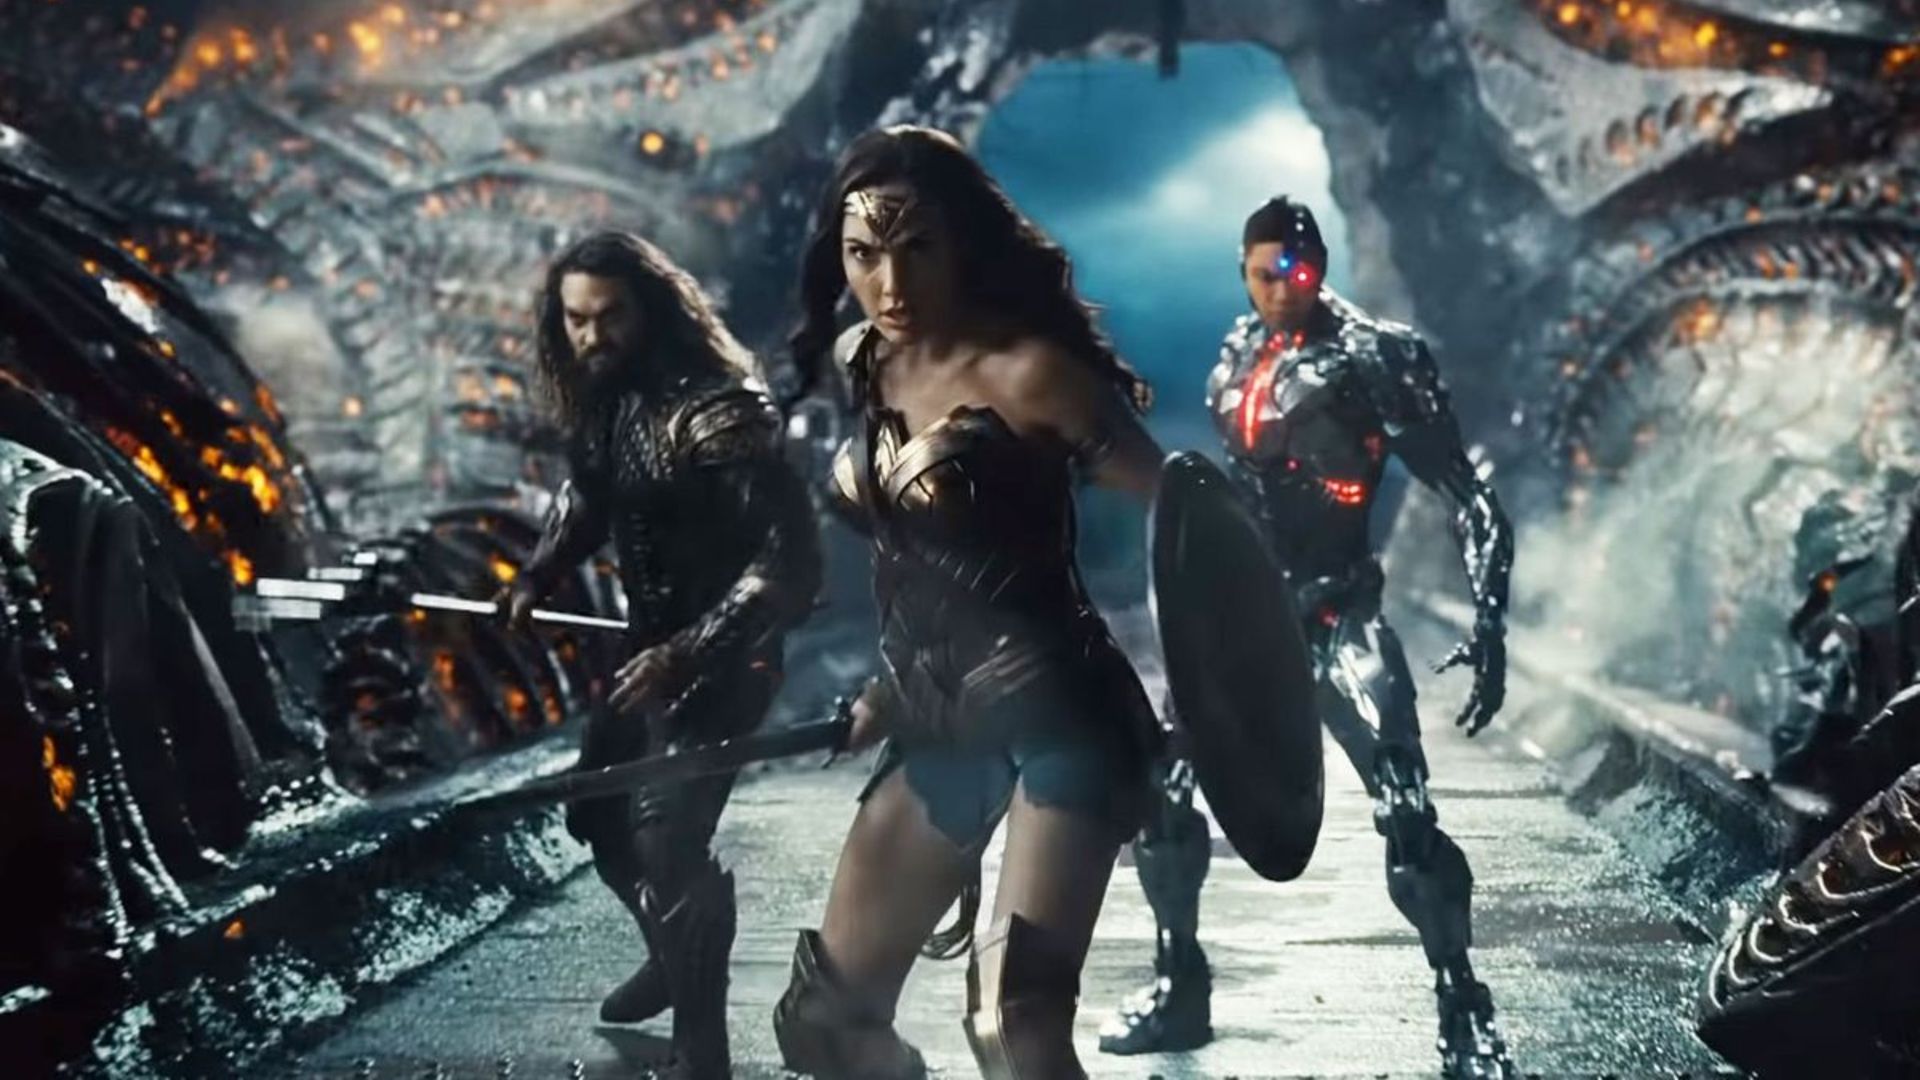 Zack Snyder's Justice League: 21 Easter eggs you may have missed | GamesRadar+